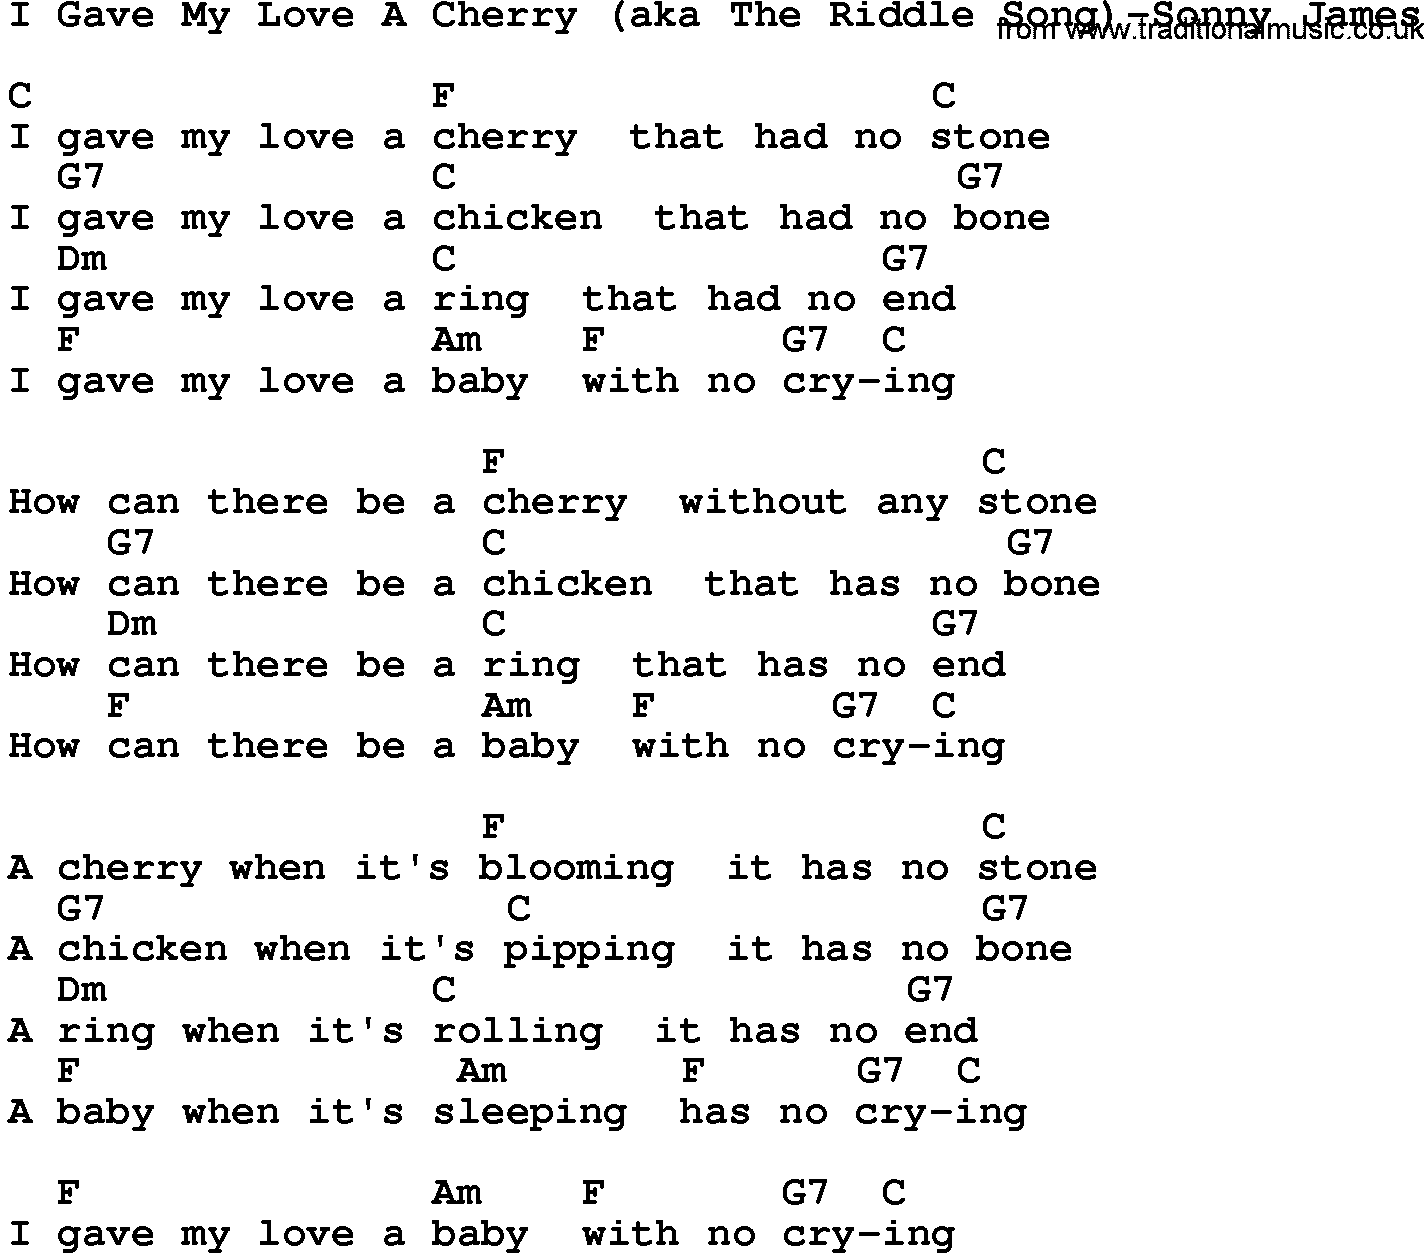 Country music song: I Gave My Love A Cherry(Aka The Riddle Song)-Sonny James lyrics and chords